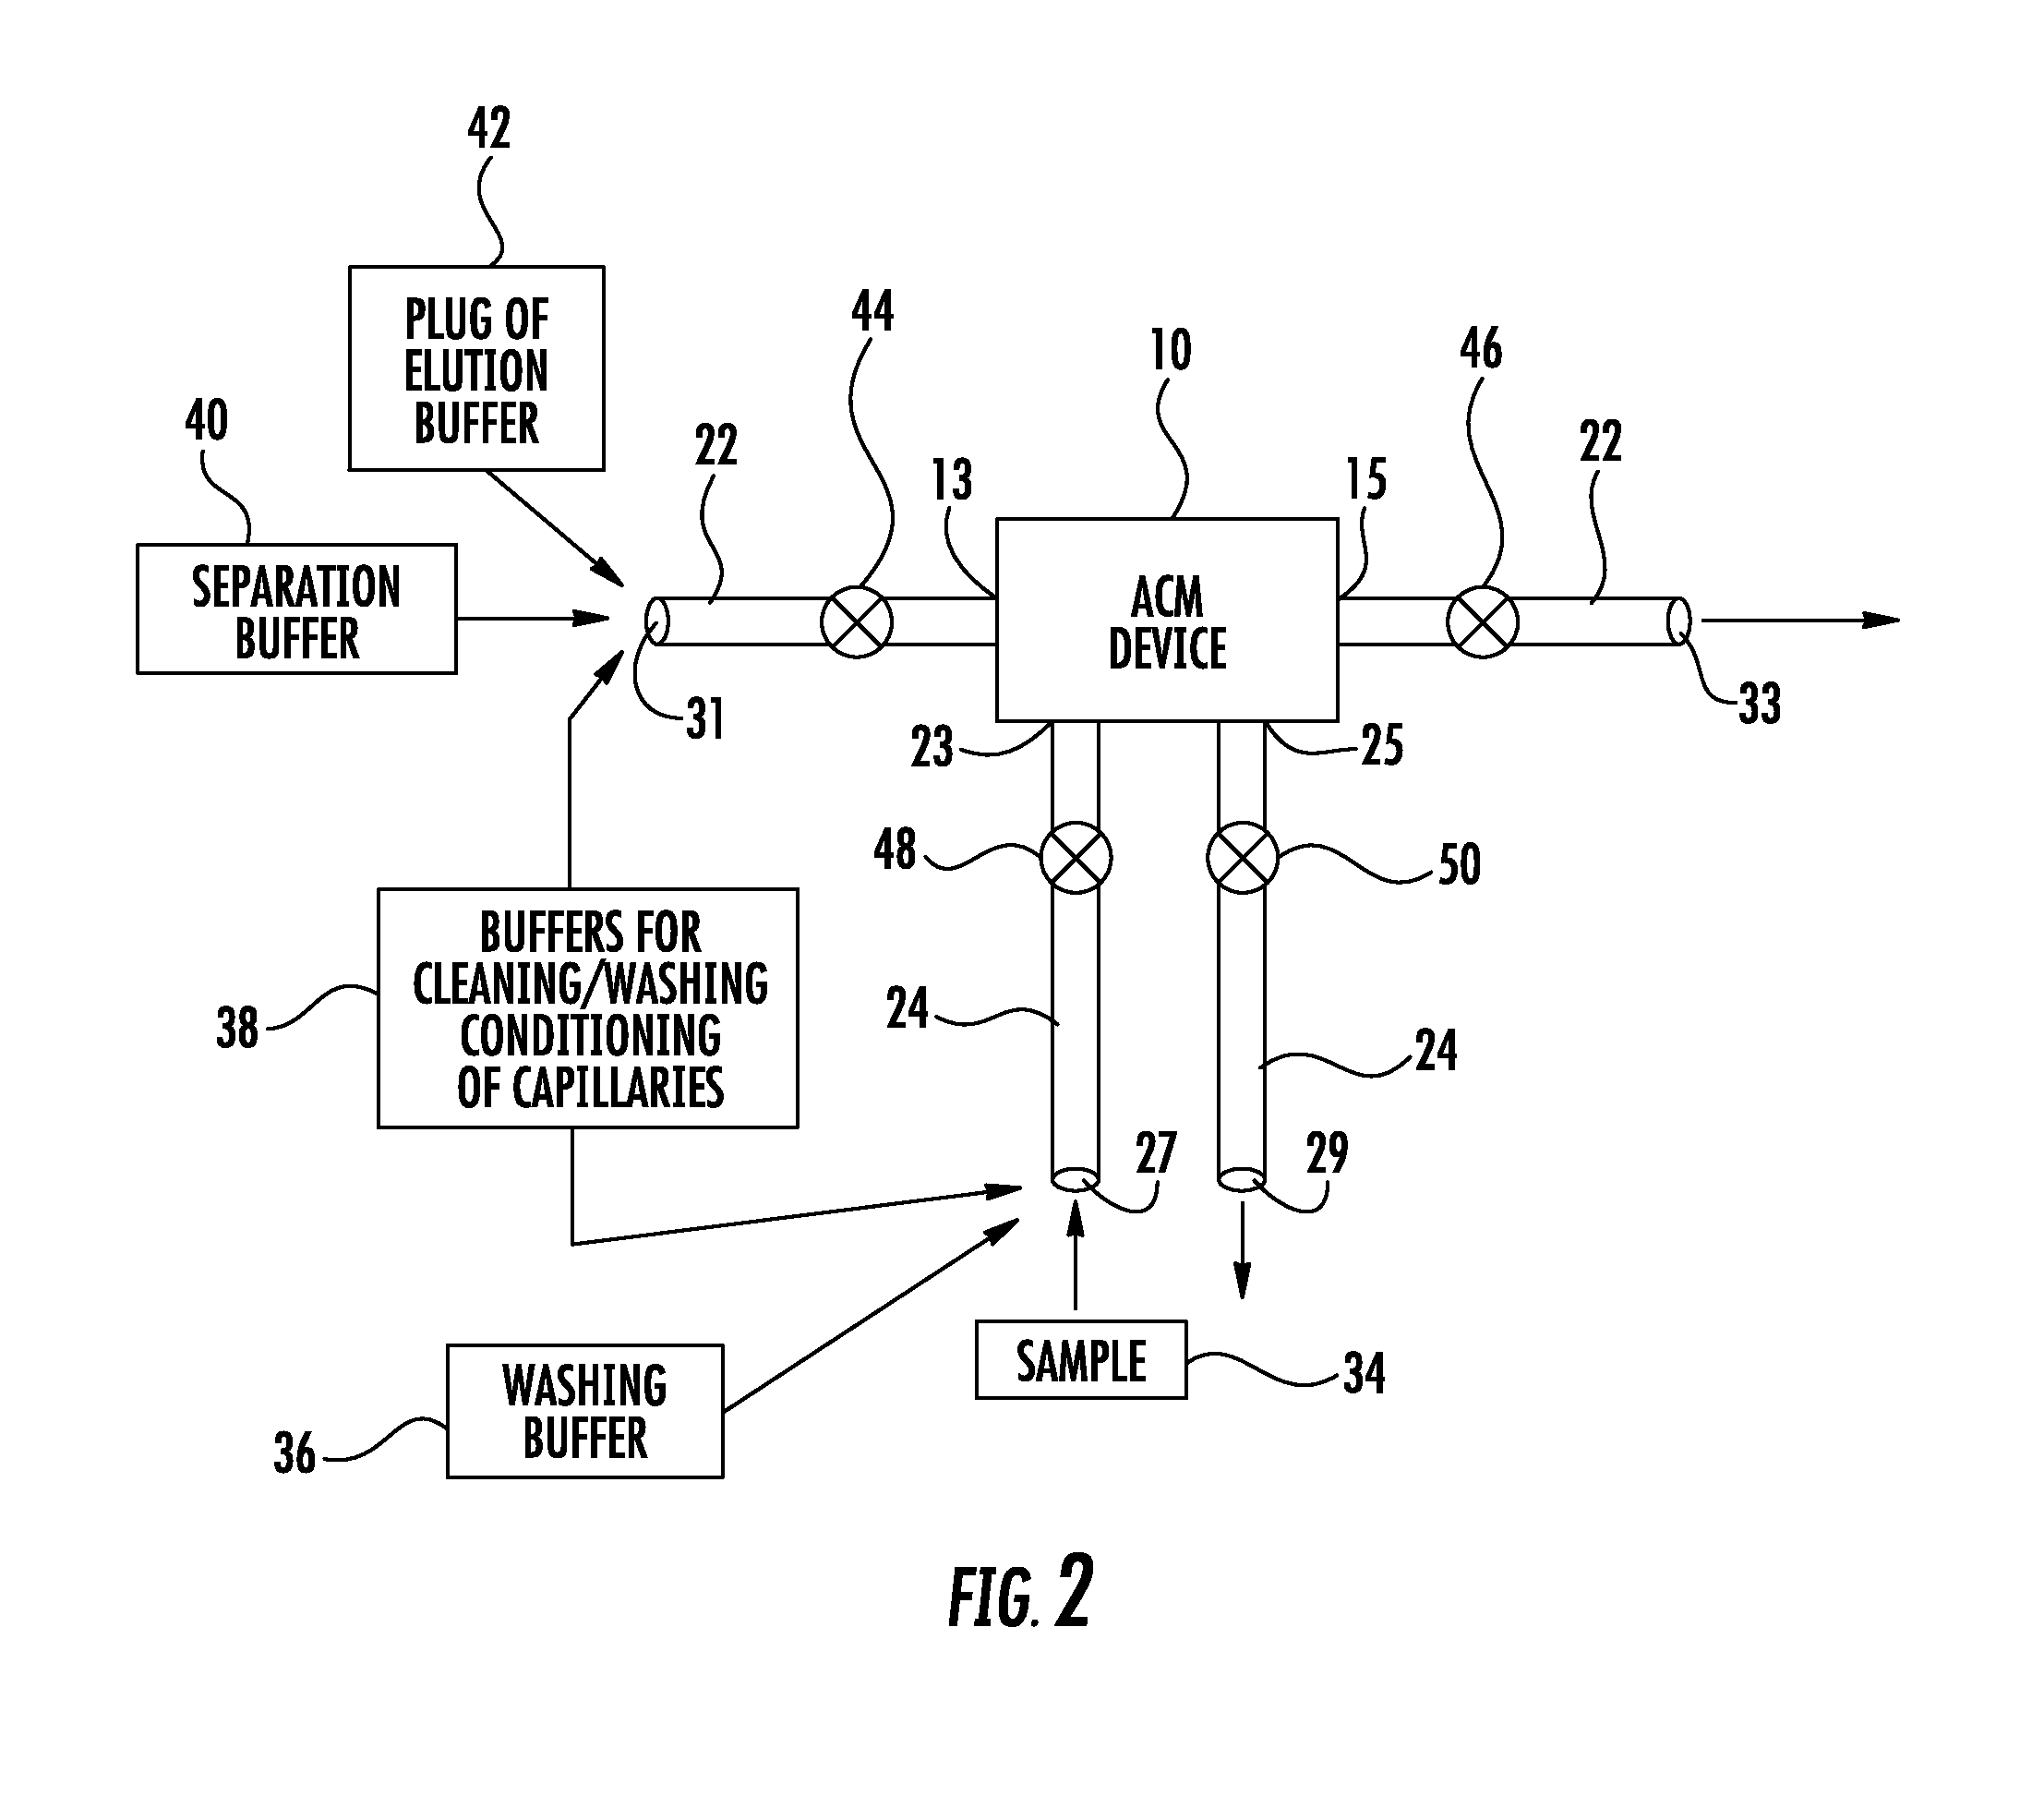 Integrated modular unit including an analyte concentrator microreactor device connected to a cartridge-cassette